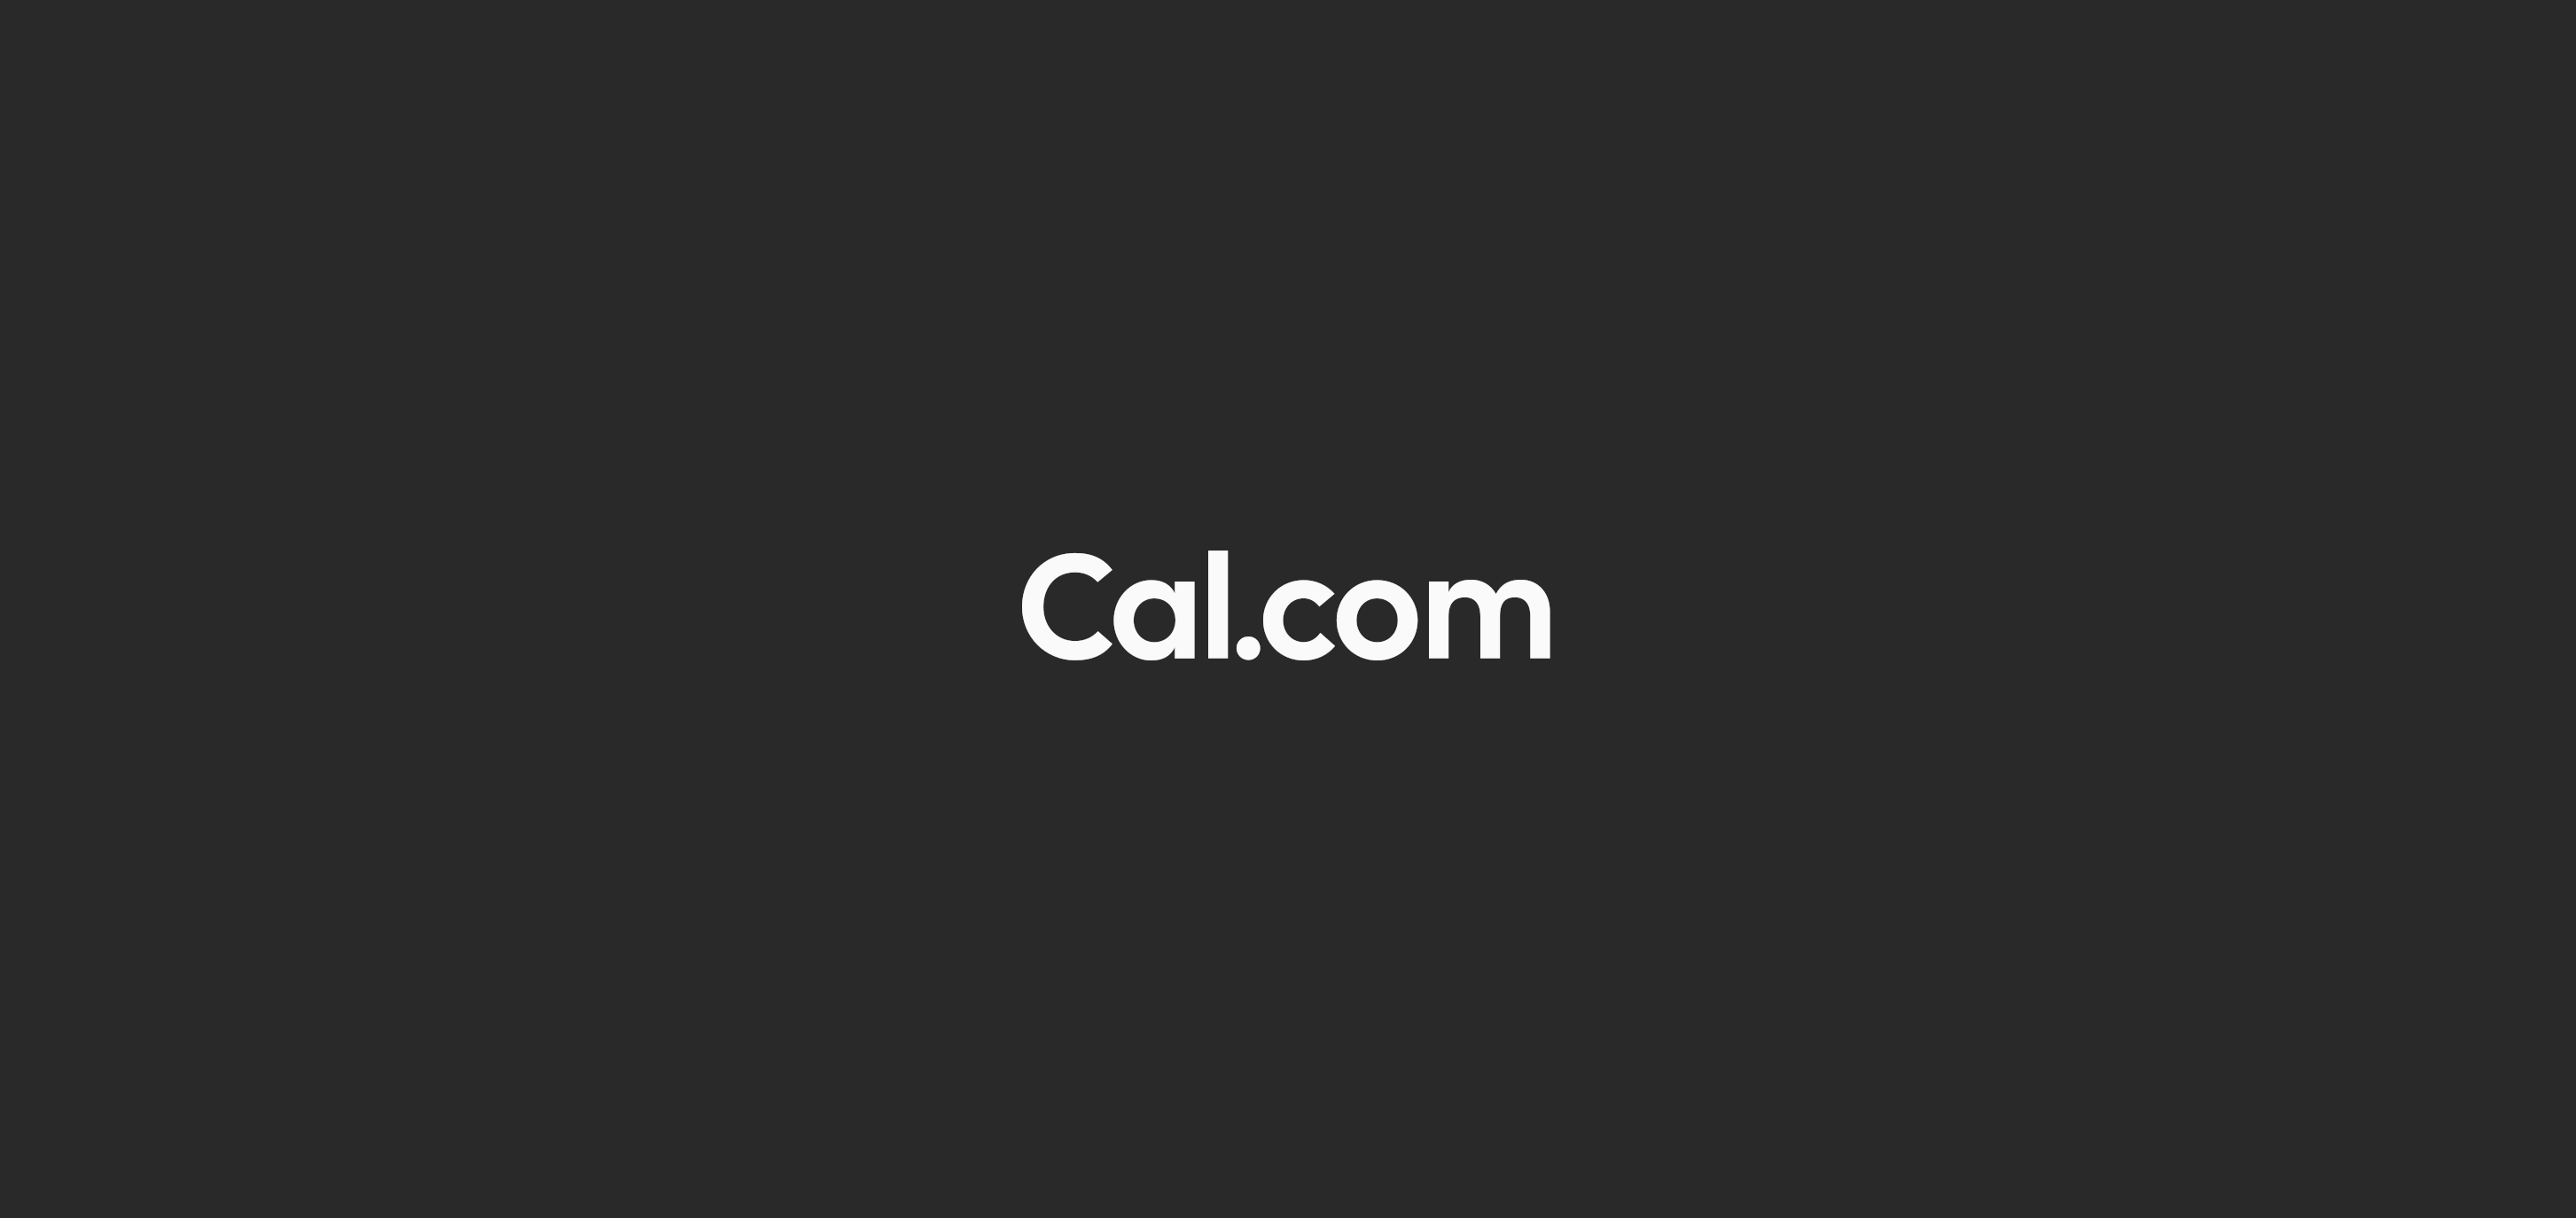 Calendso rebrands to Cal.com and launches v.1.0